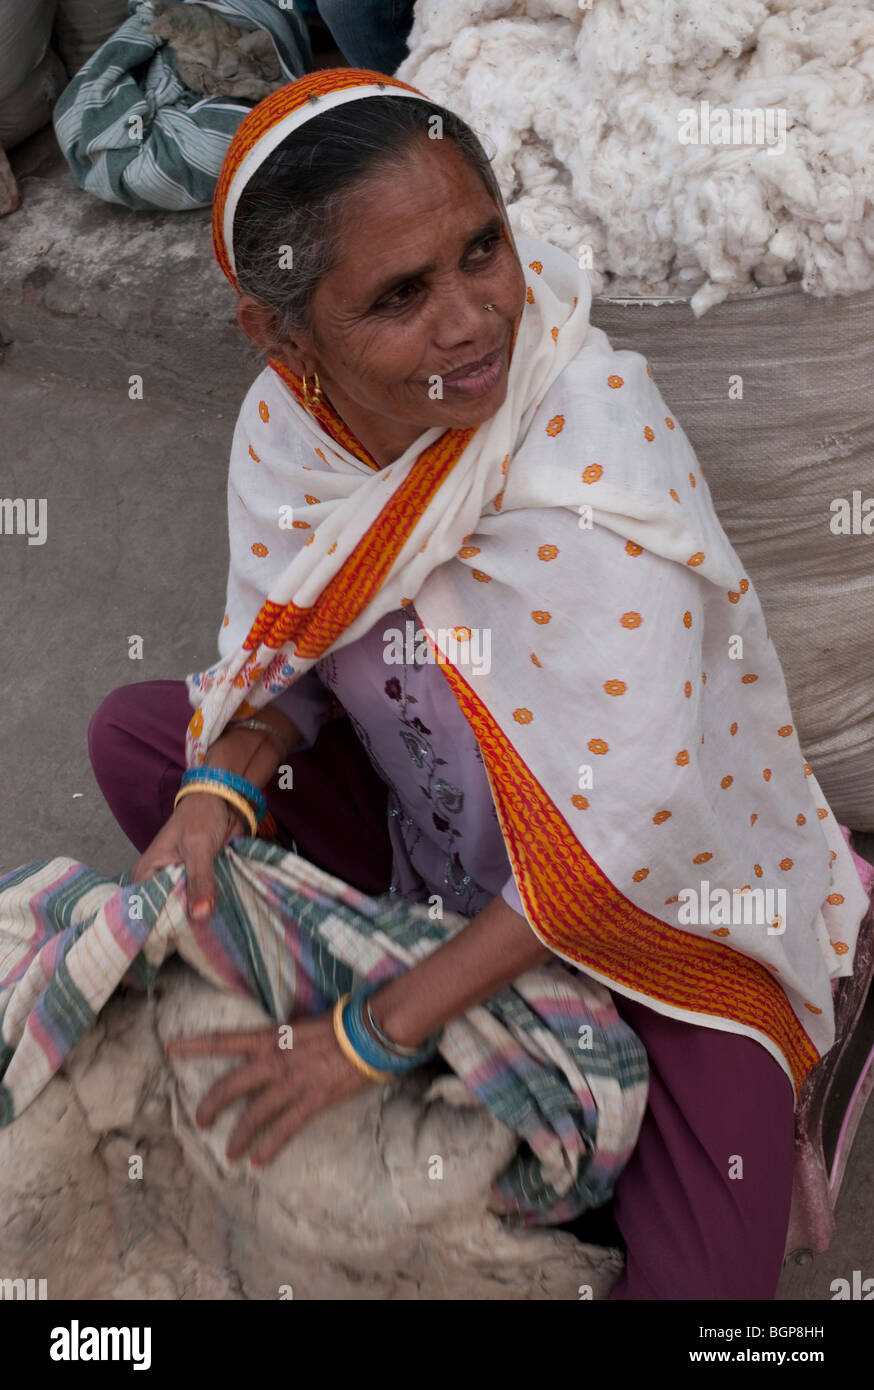 An Indian woman in a saree stuffing cotton wool into a mattress, Delhi, India Stock Photo